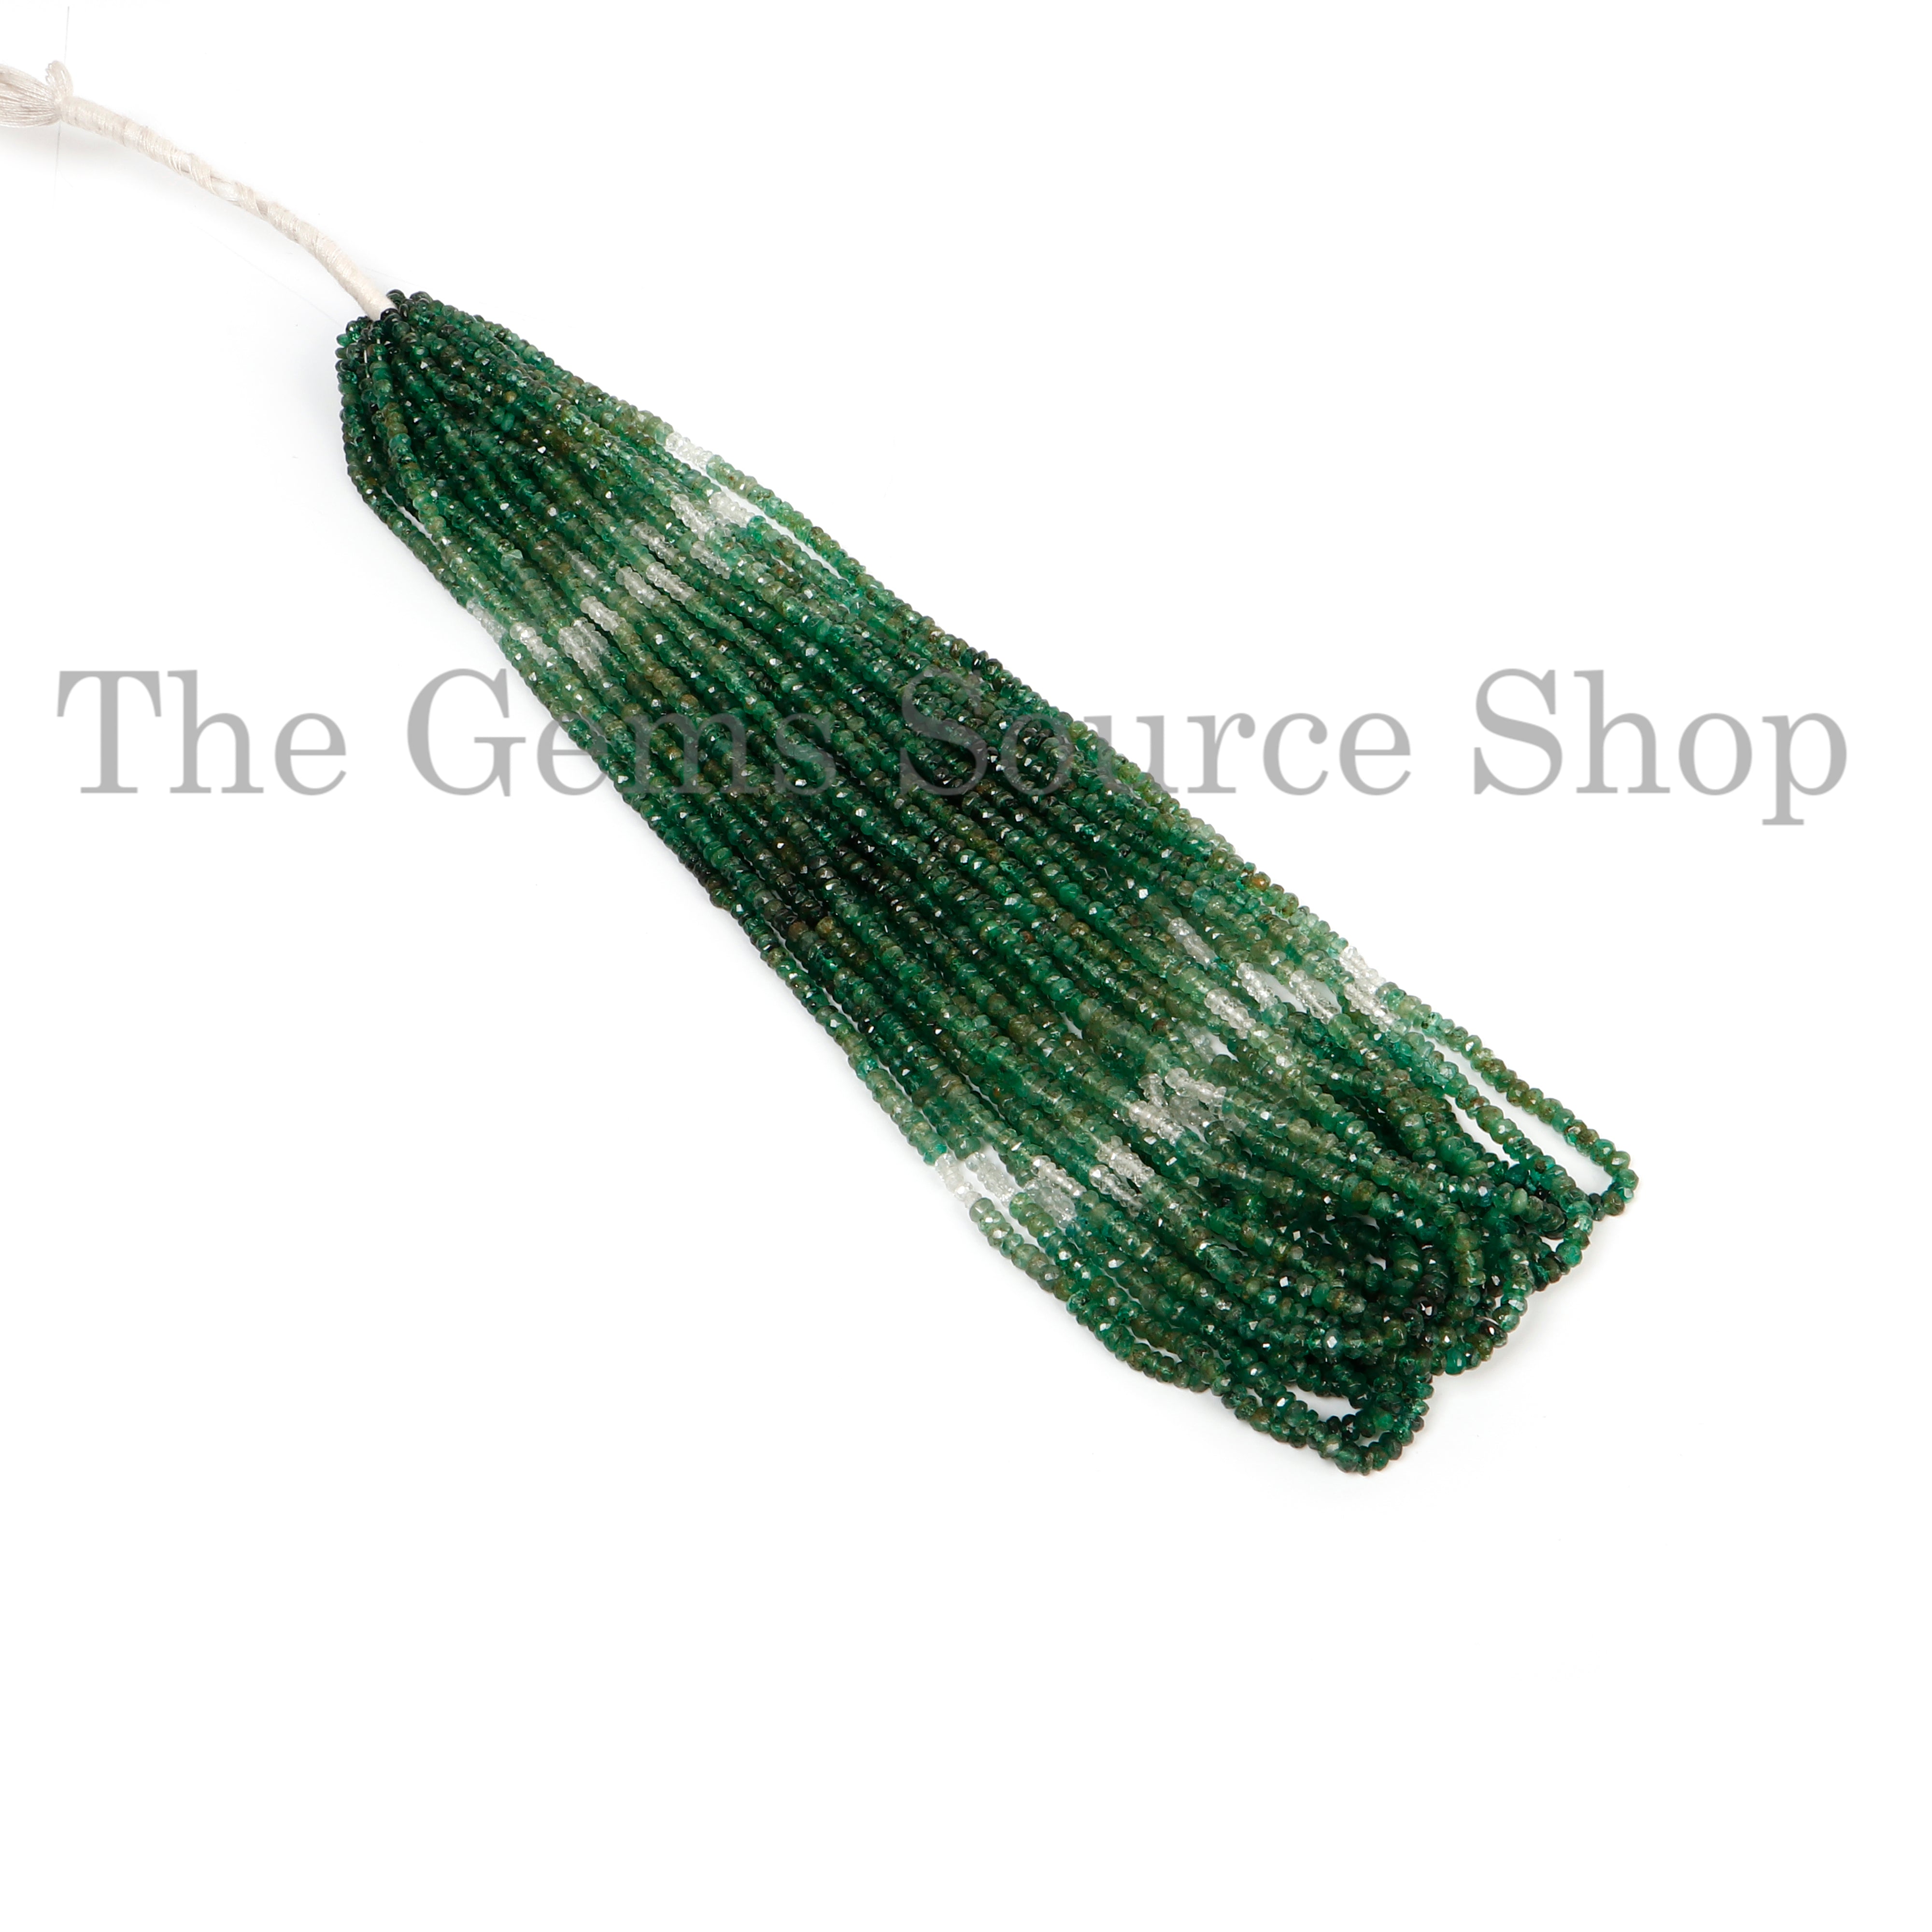 Shaded Emerald Beads, Emerald Faceted Beads, Emerald Rondelle Beads, Emerald Gemstone Beads